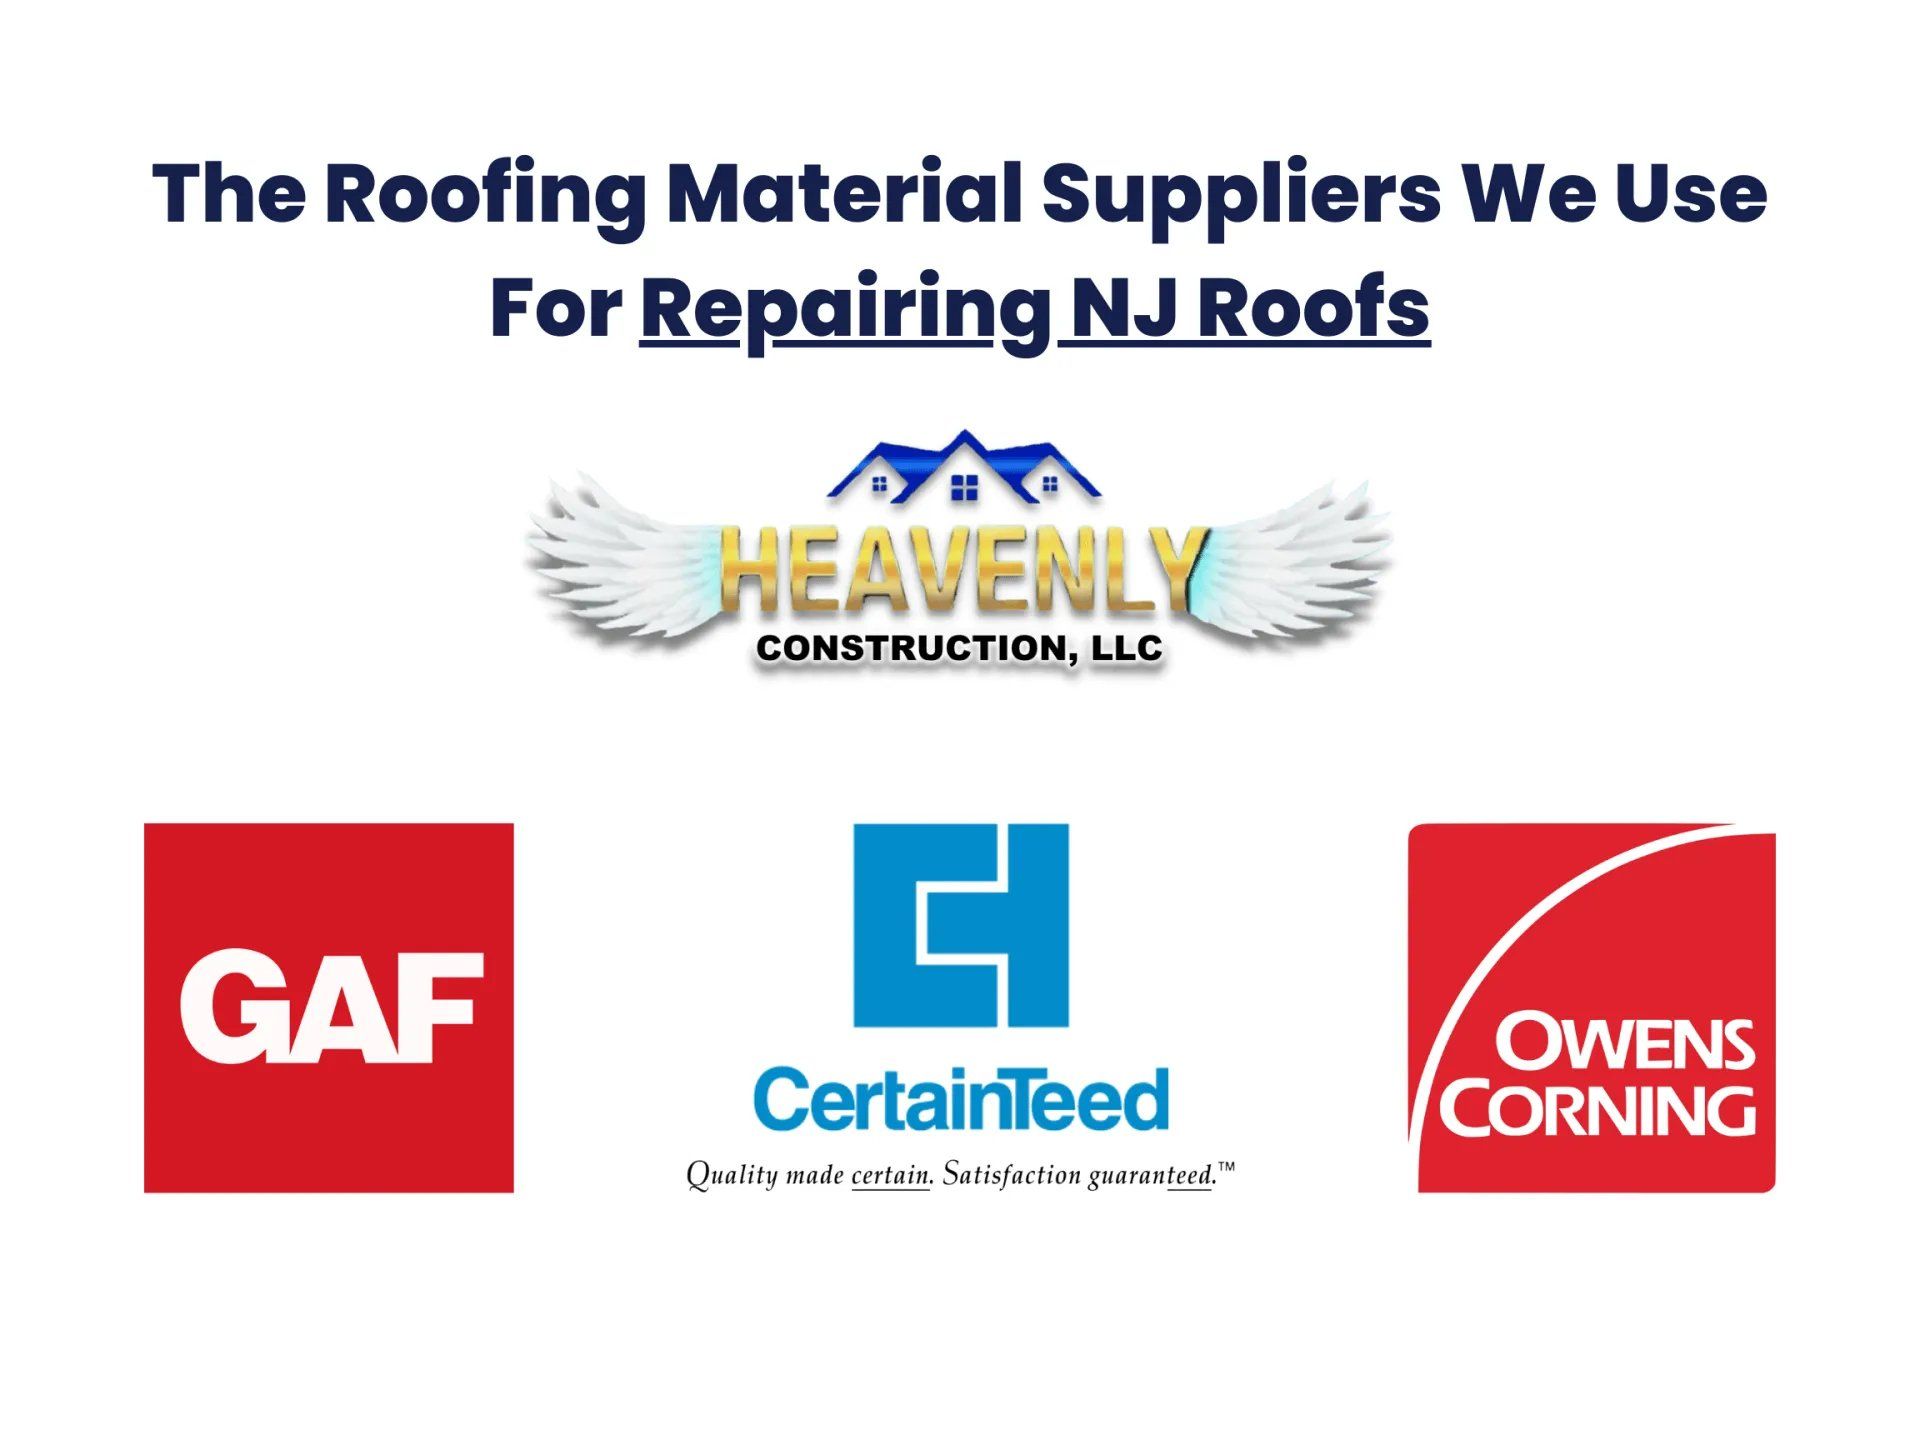 GAF, CertainTeed, and Owens Corning logos. Roof repair suppliers for Heavenly Construction.